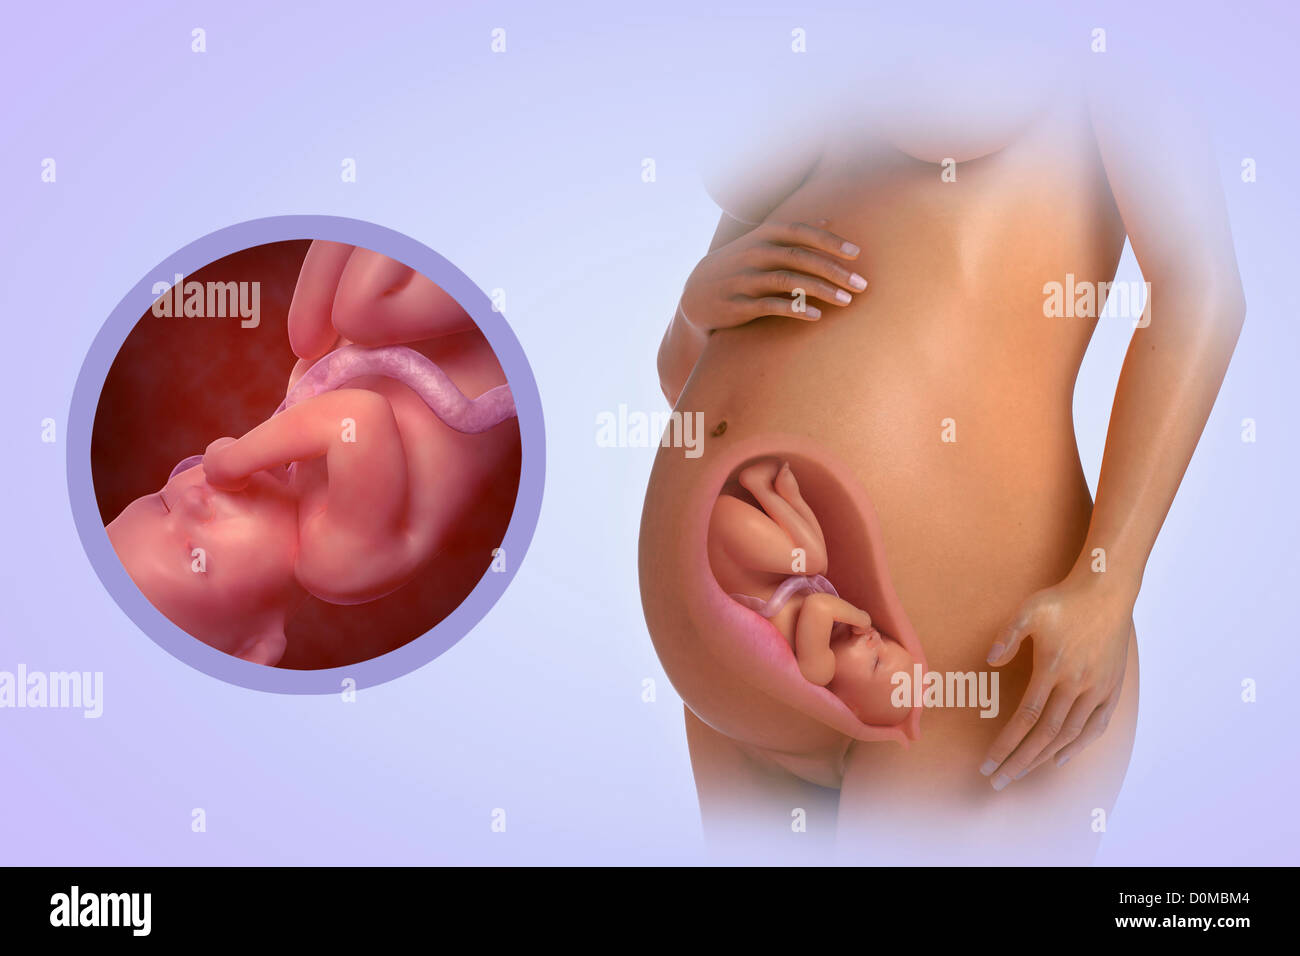 A human model showing pregnancy at week 34. Stock Photo